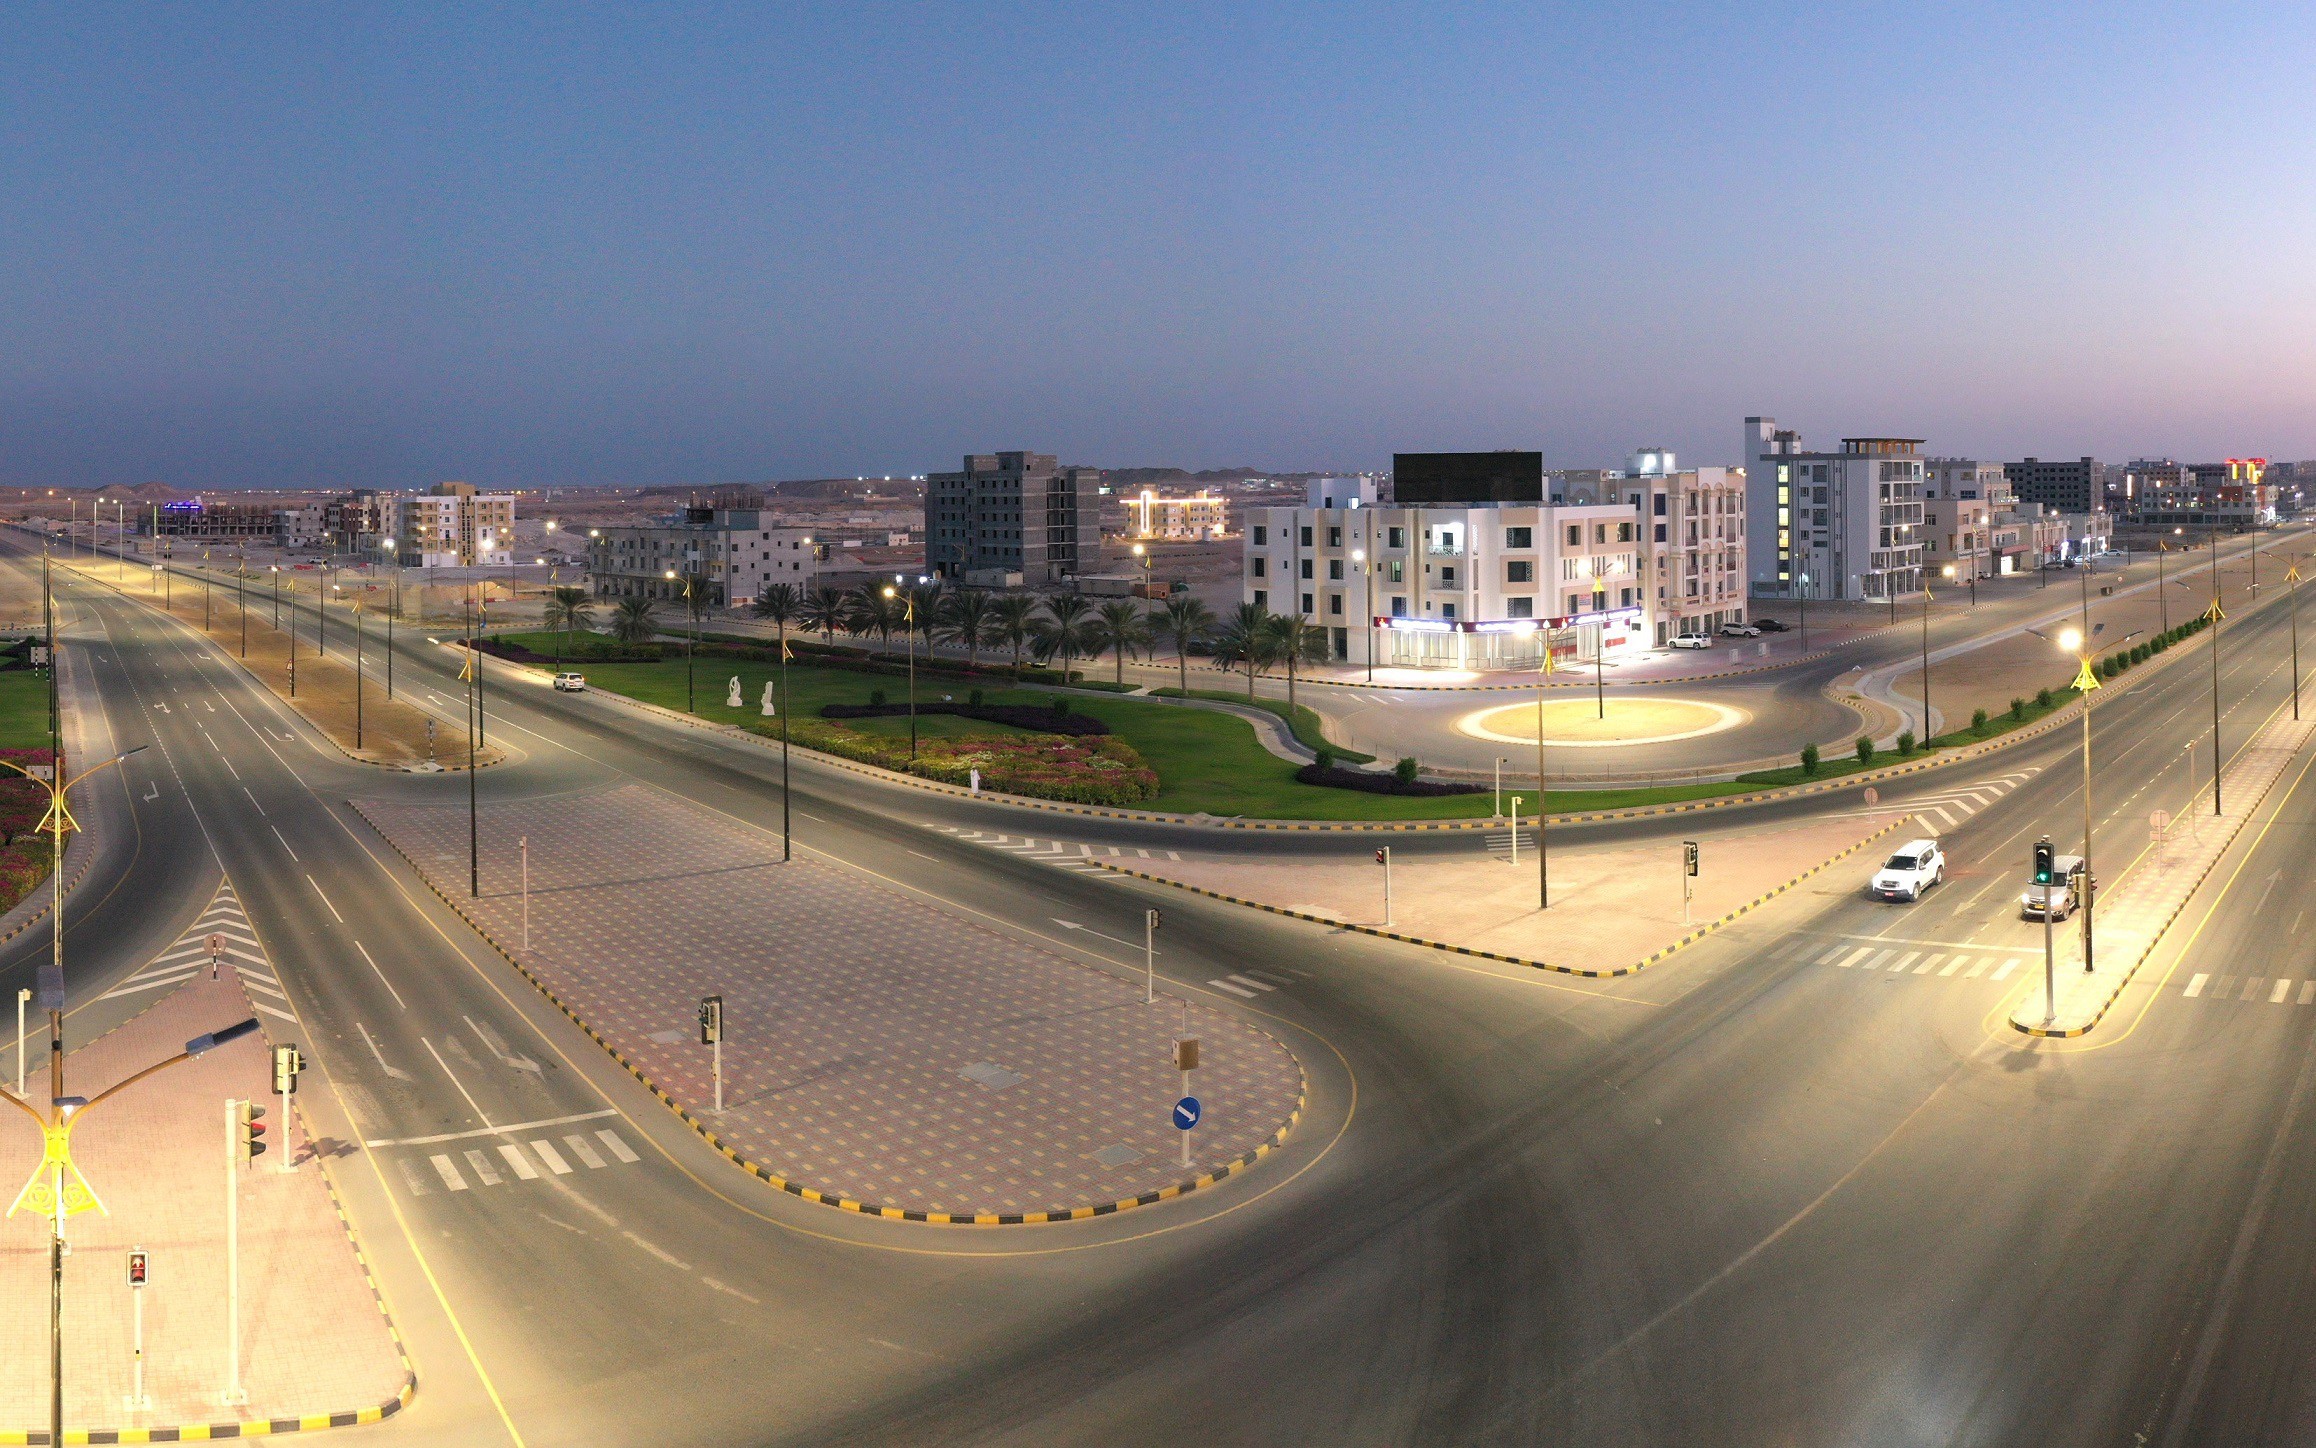 Service works and modern facilities to improve lifestyle in Saay commercial District, Duqm